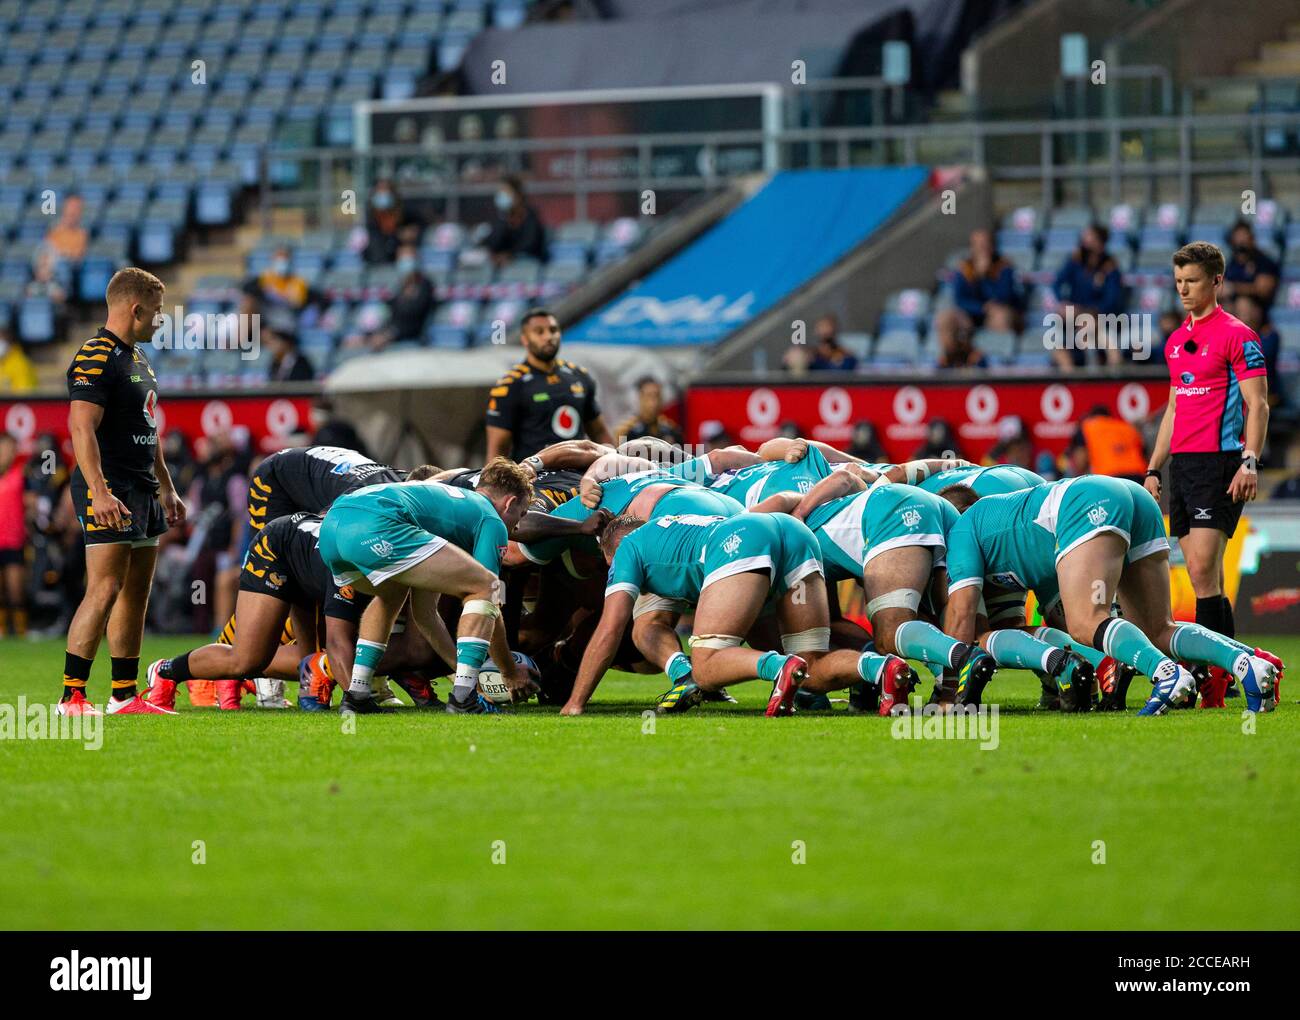 Ricoh Arena, Coventry, West Midlands, England; 21st Aug 2020. English Gallagher Premiership Rugby, Wasps versus Worcester Warriors; The two packs scrummage during the Gallagher Premiership Rugby match between Wasps and Worcester Warriors at Ricoh Arena on August 21st 2020 in Coventry England Credit: Action Plus Sports Images/Alamy Live News Stock Photo